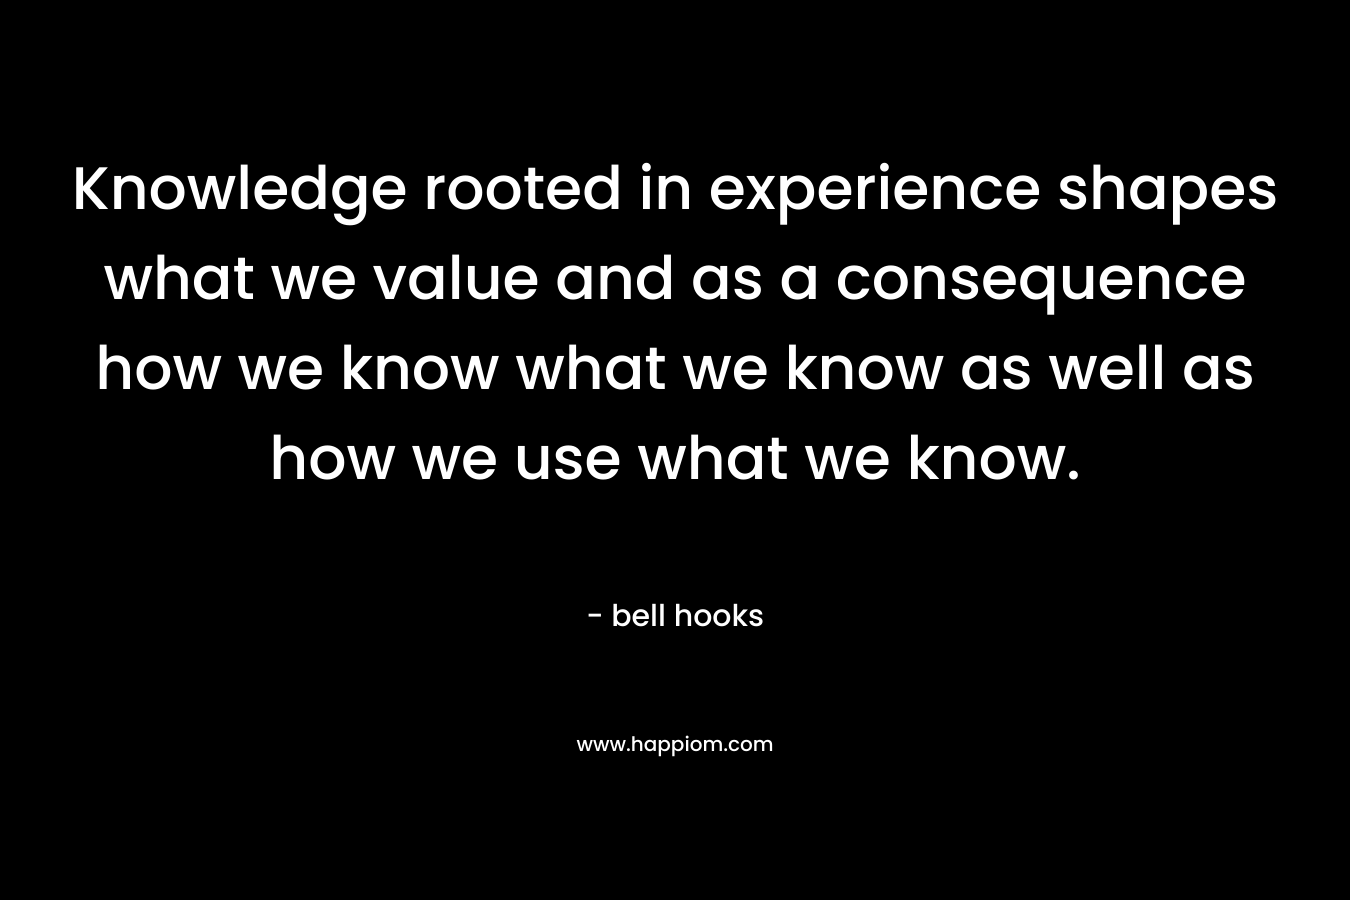 Knowledge rooted in experience shapes what we value and as a consequence how we know what we know as well as how we use what we know. – bell hooks